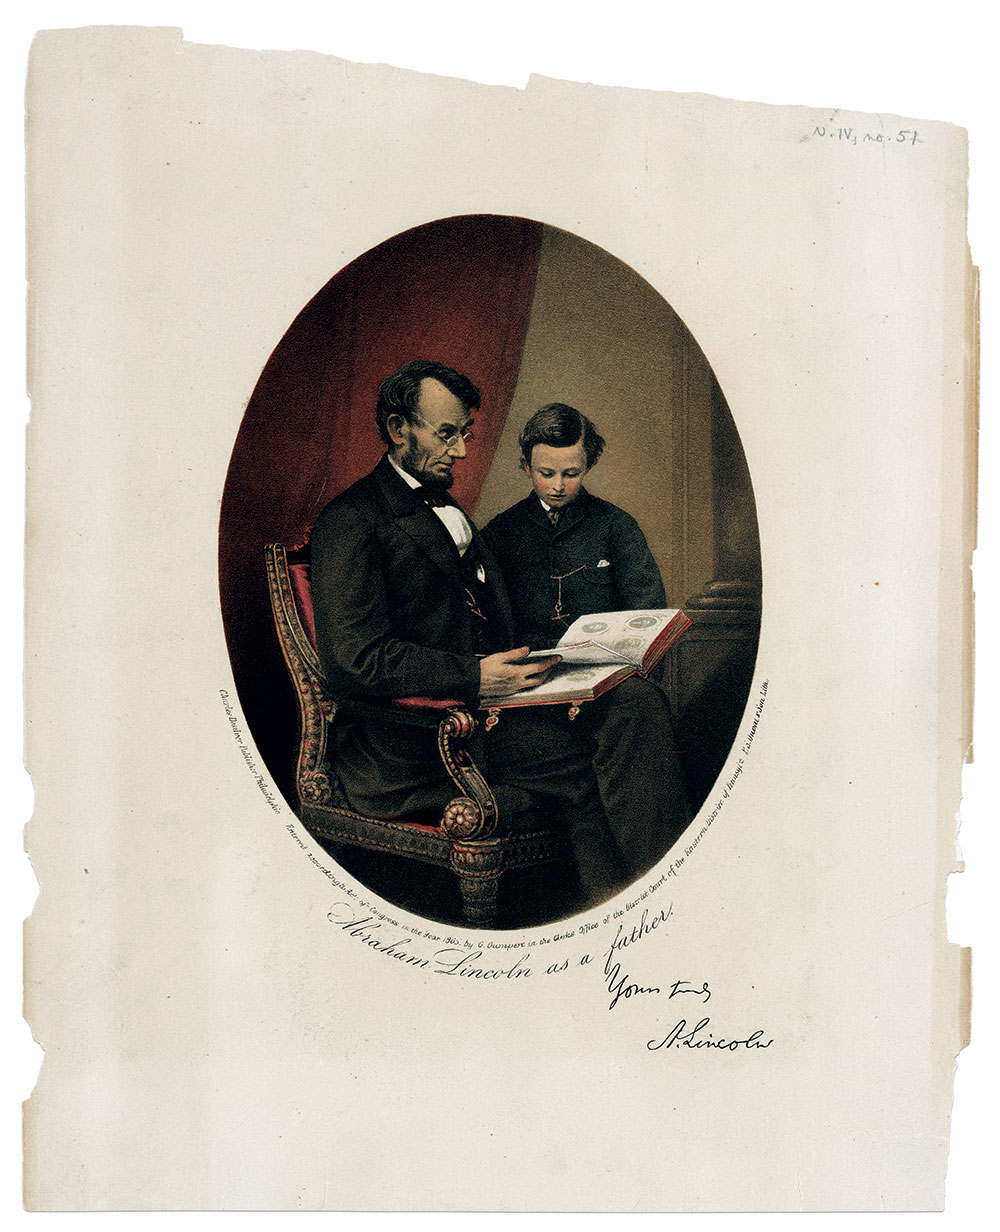 Philadelphia’s Charles Desilver published a lithograph of “Abraham Lincoln as a father” with the president’s facsimile signature in 1865, and made the photograph available in the carte de visite format. The drawing for the lithograph is credited to Philadelphia-based artist Gustav E. Gumpert. 